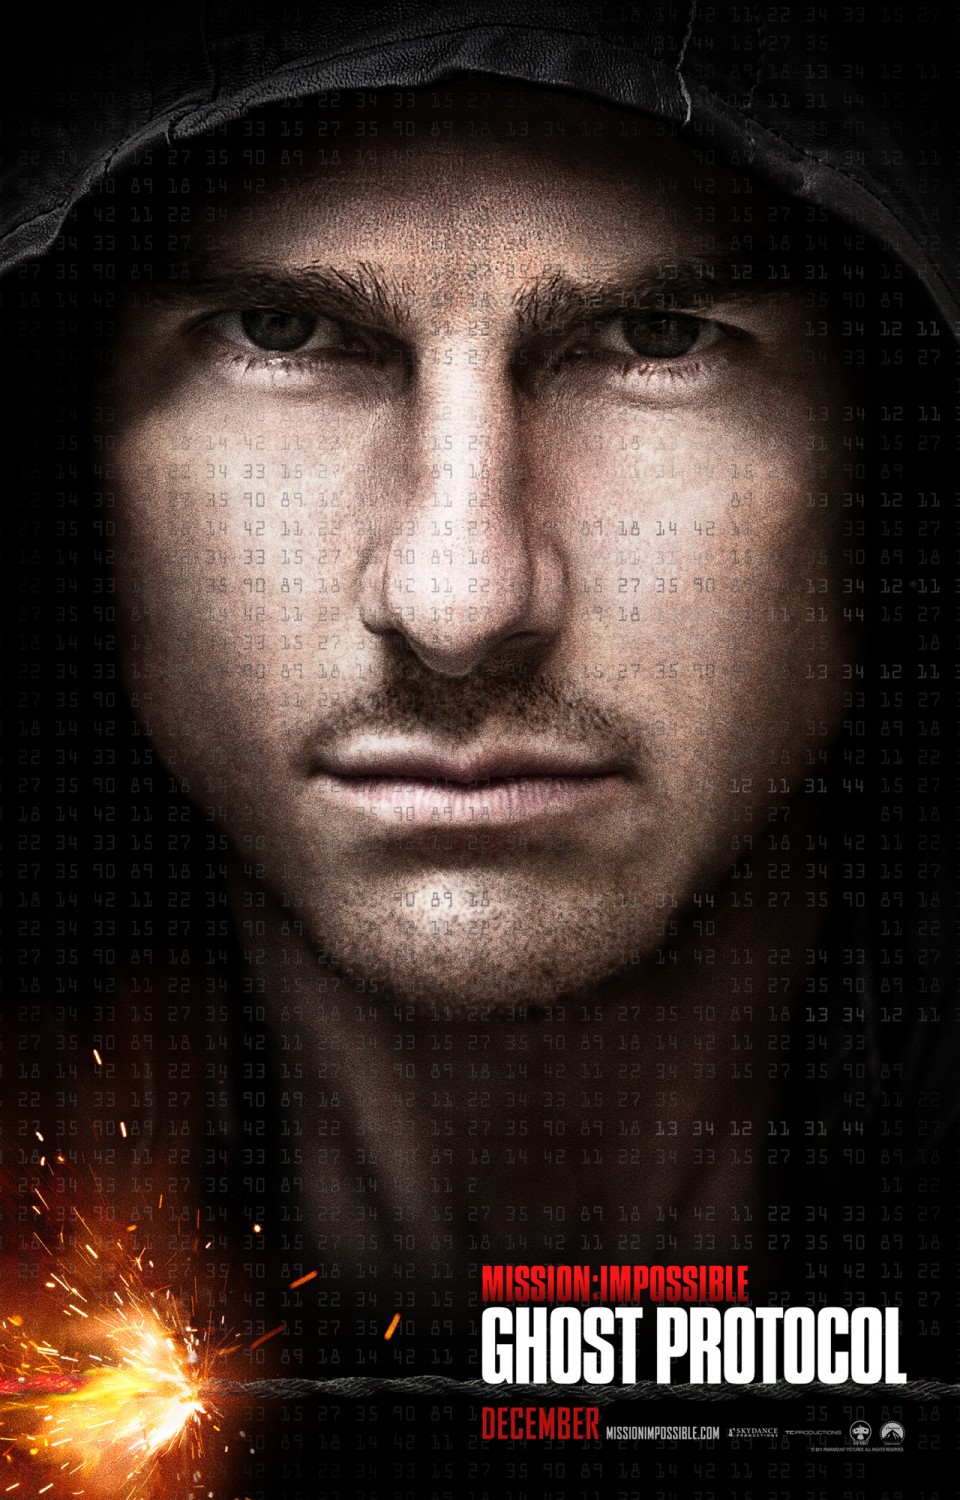 Mission Impossible 4 Movie Soundtrack Download free online